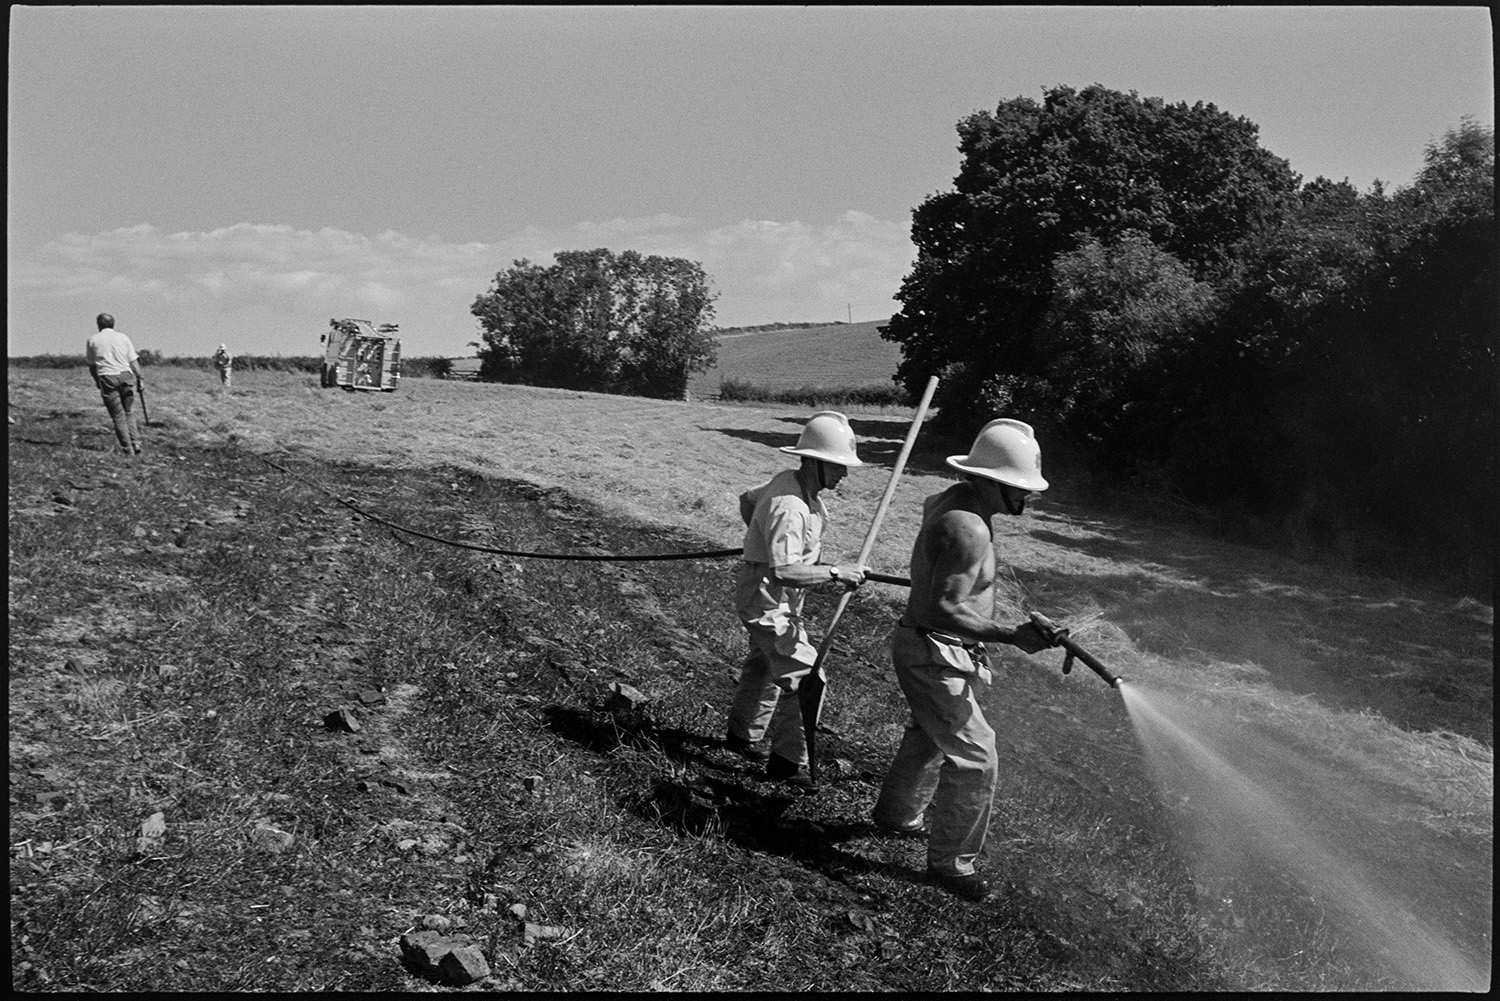 Firemen damping down field after crop fire. Fire engine parked in field.
[Two firemen hosing down a crop fire in a field near Chawleigh, with two men and a fire engine in the background. One of the men is holding a beater.]